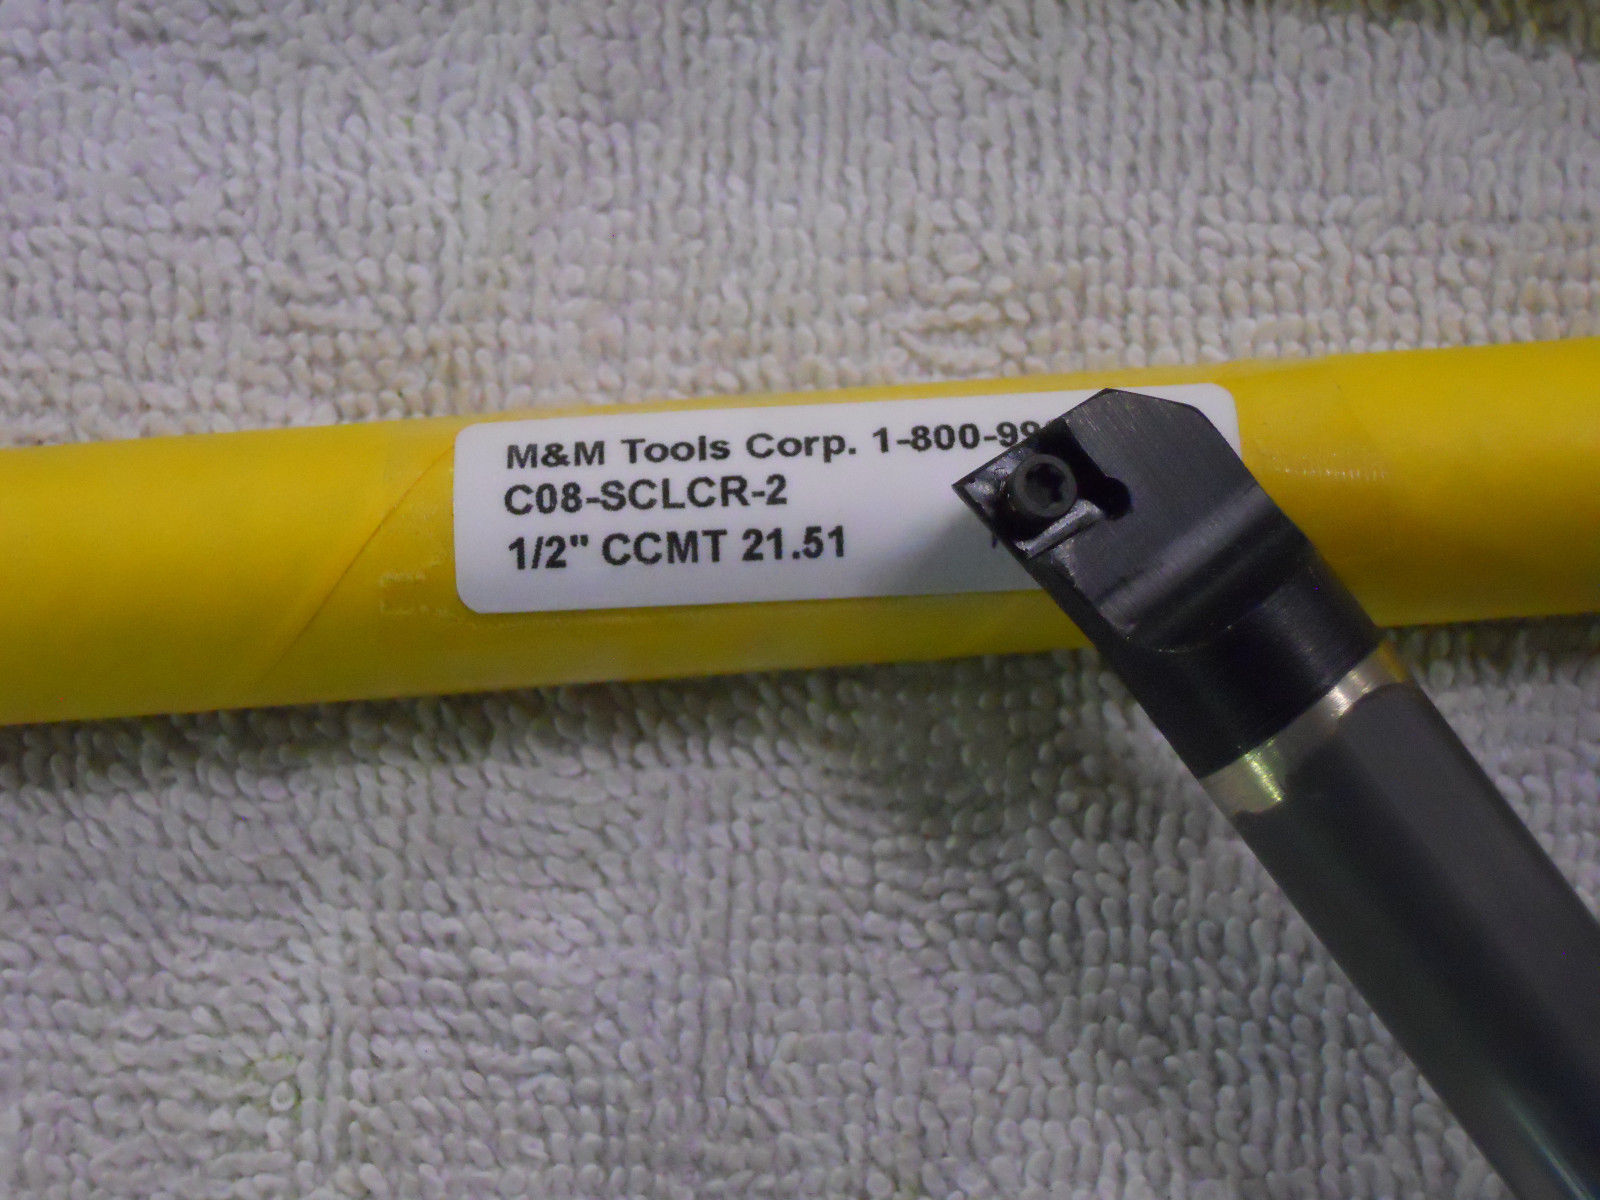 1 NEW 5/16" CARBIDE BORING BAR TAKES CCMT 21.51 INSERT OAL 4-1/8" W/ COOL {A651}